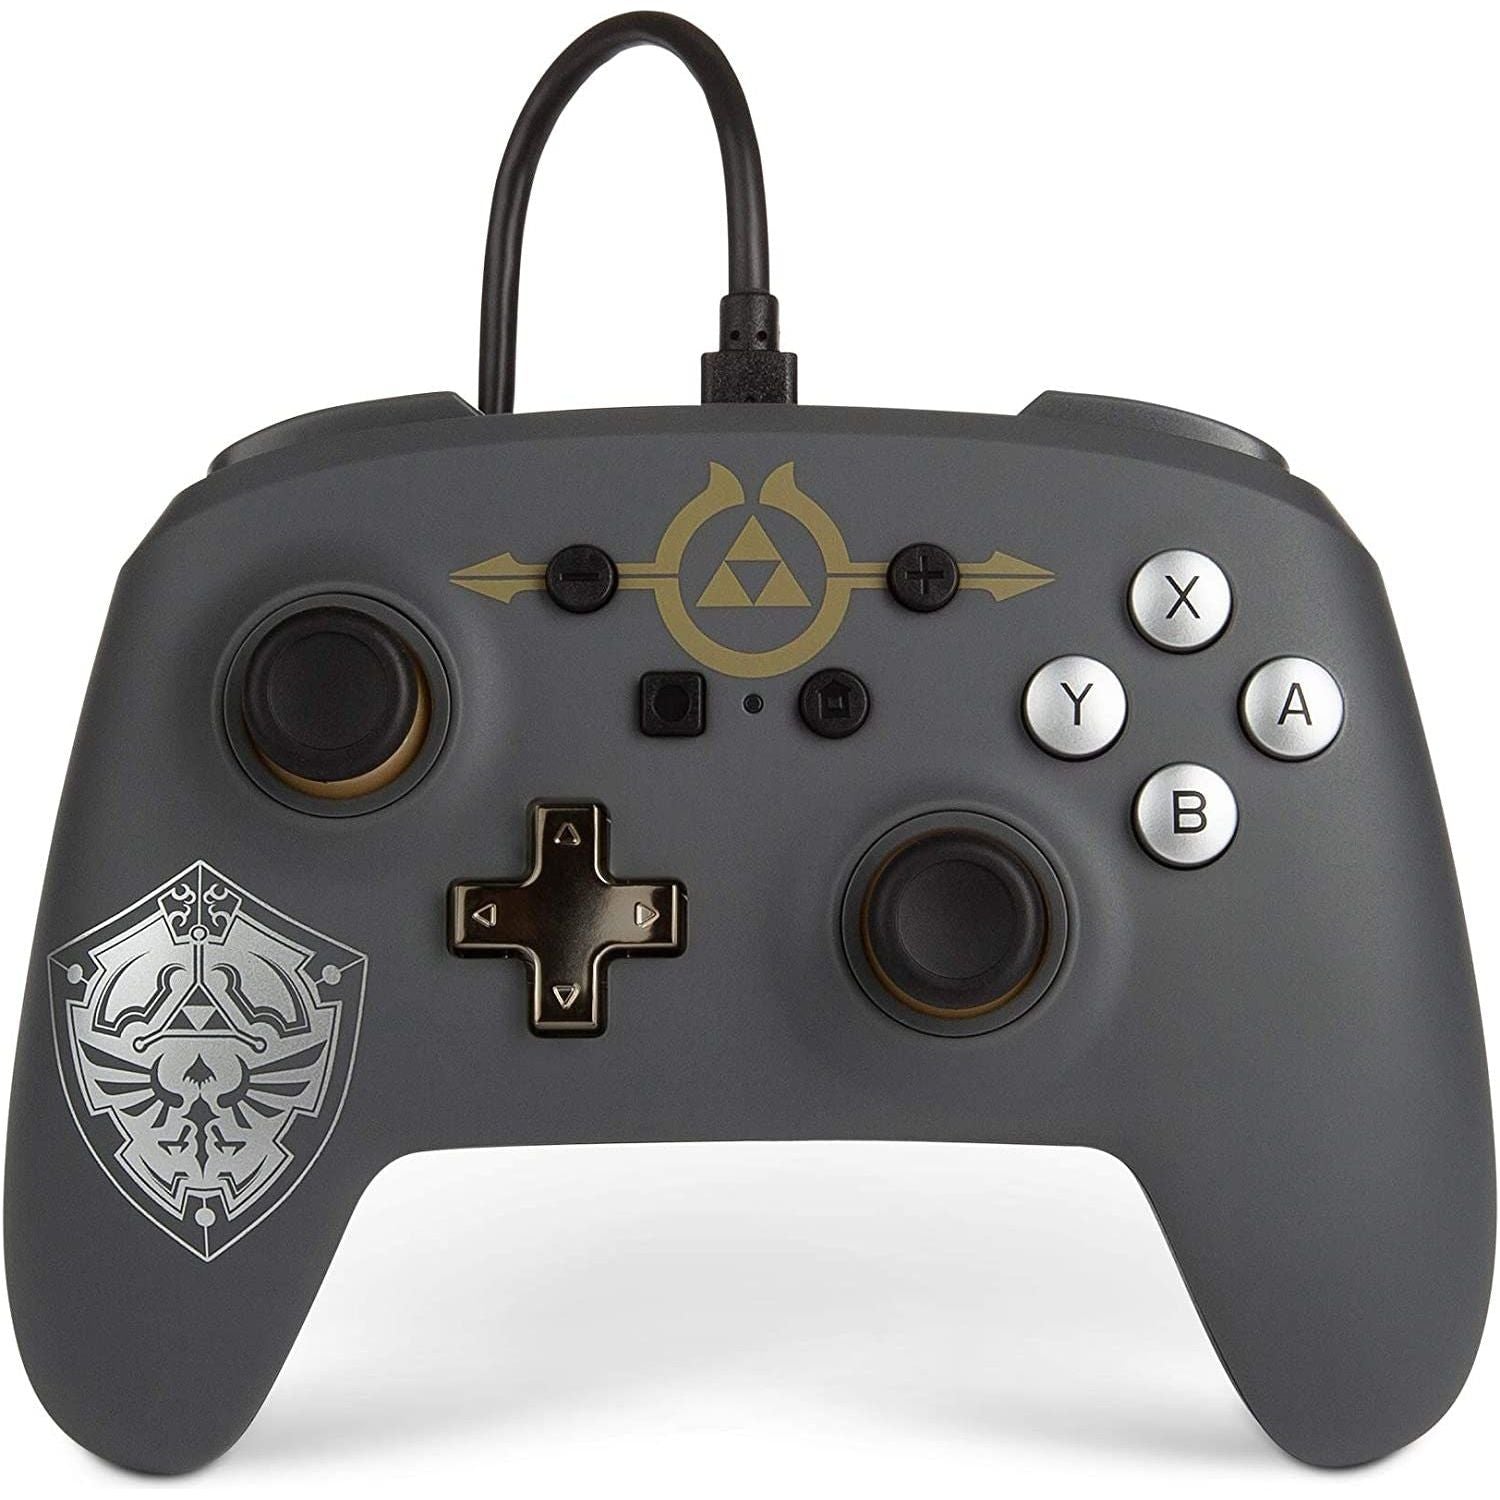 Nintendo Switch The Legend of Zelda Enhanced Wired Controller by PowerA